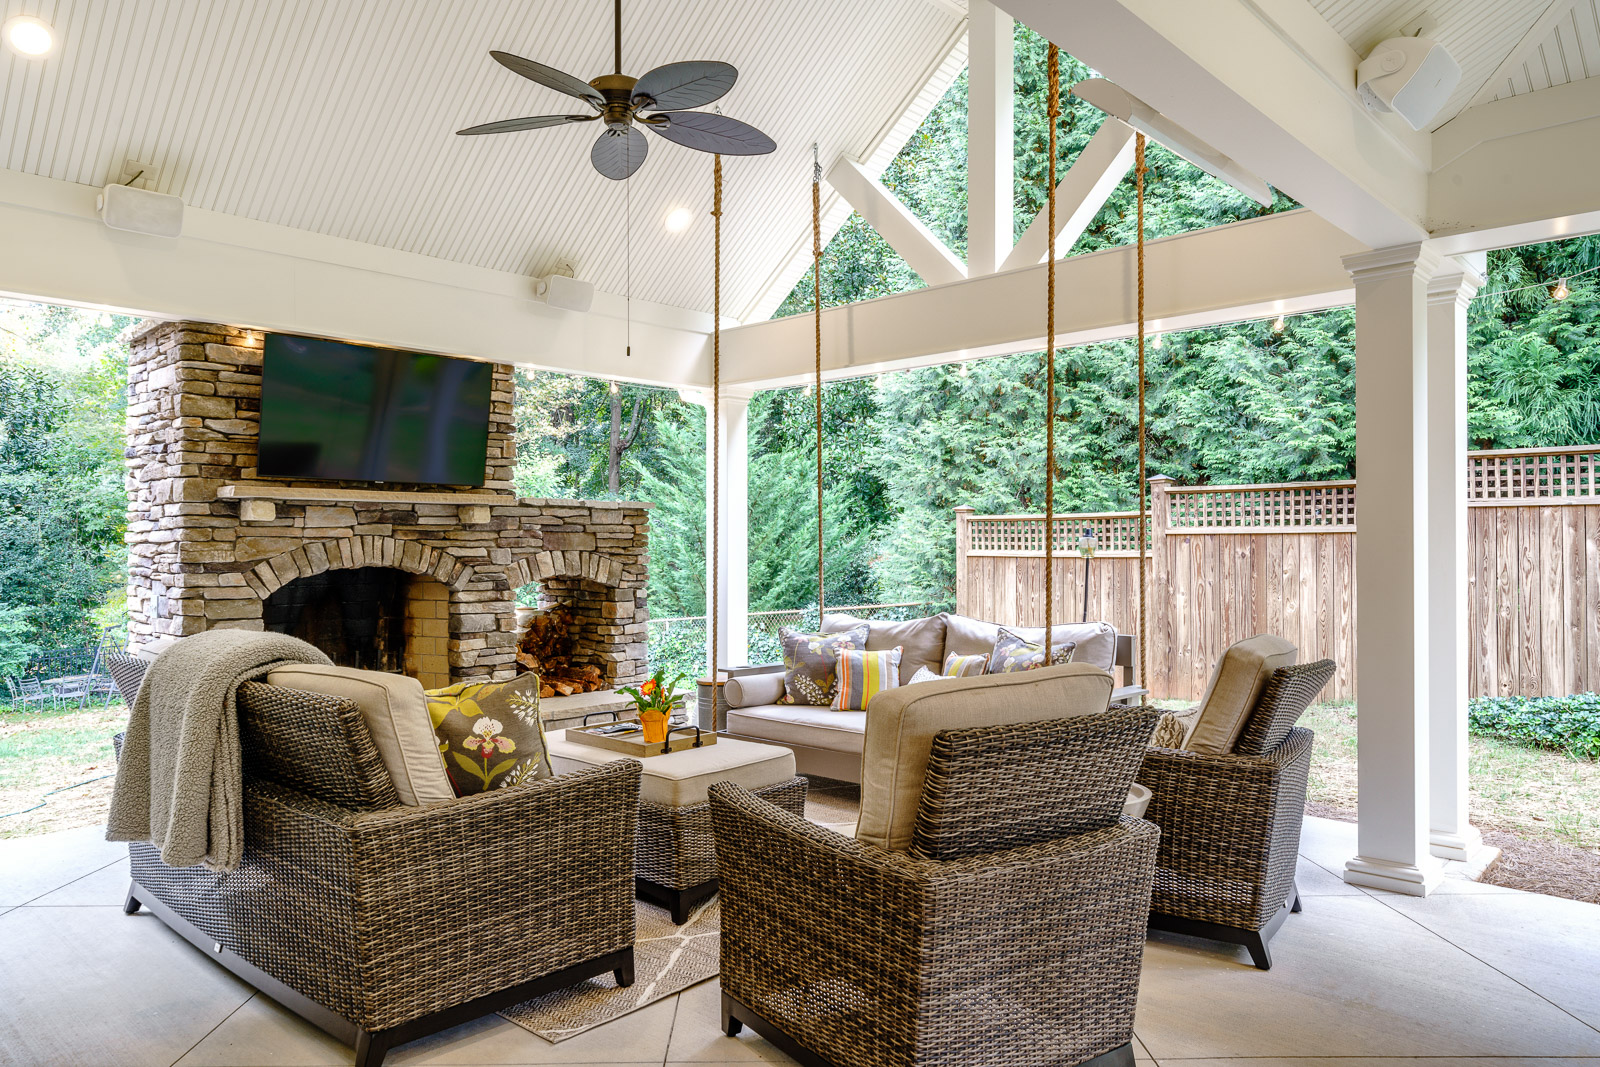 This large covered patio remodeling project is an ideal space to comfortably enjoy the outdoors year-round.